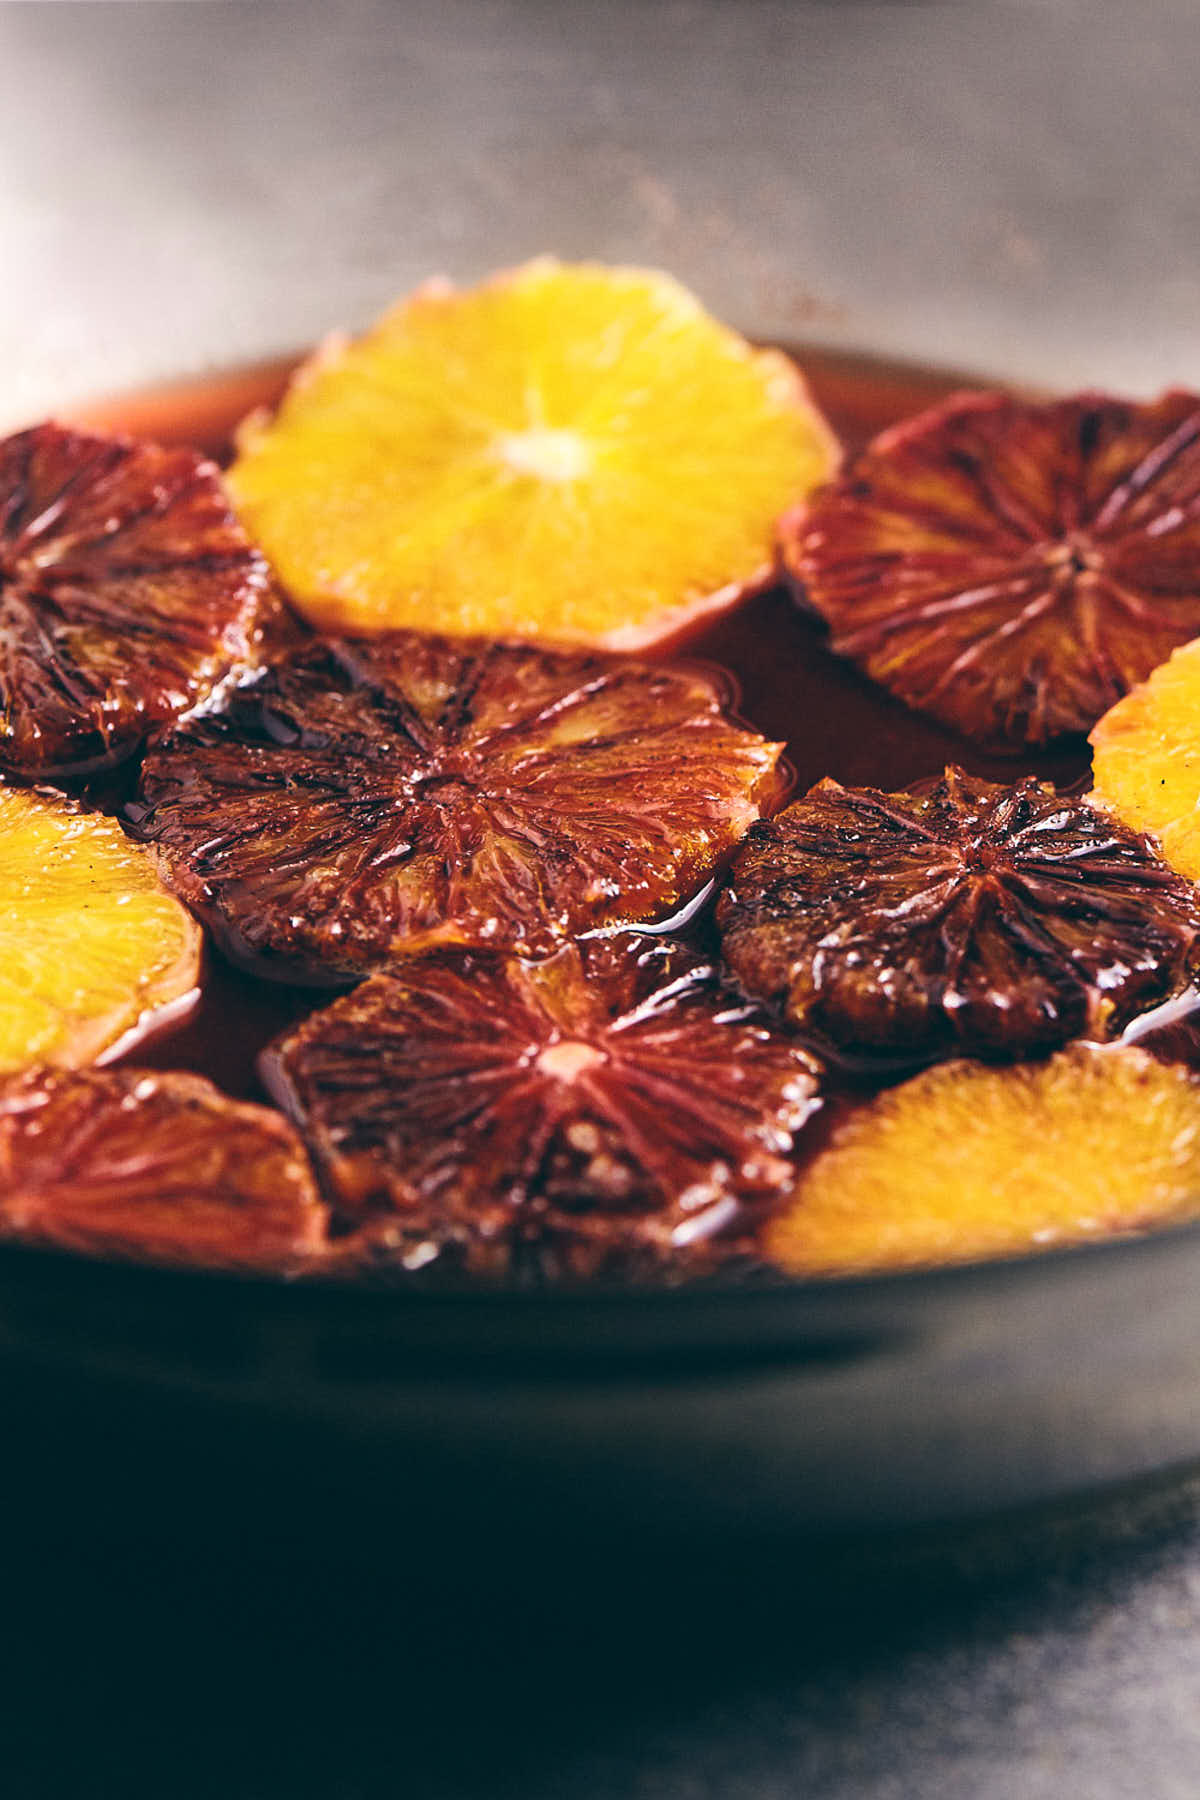 Blood oranges being cooked down in a silver pan